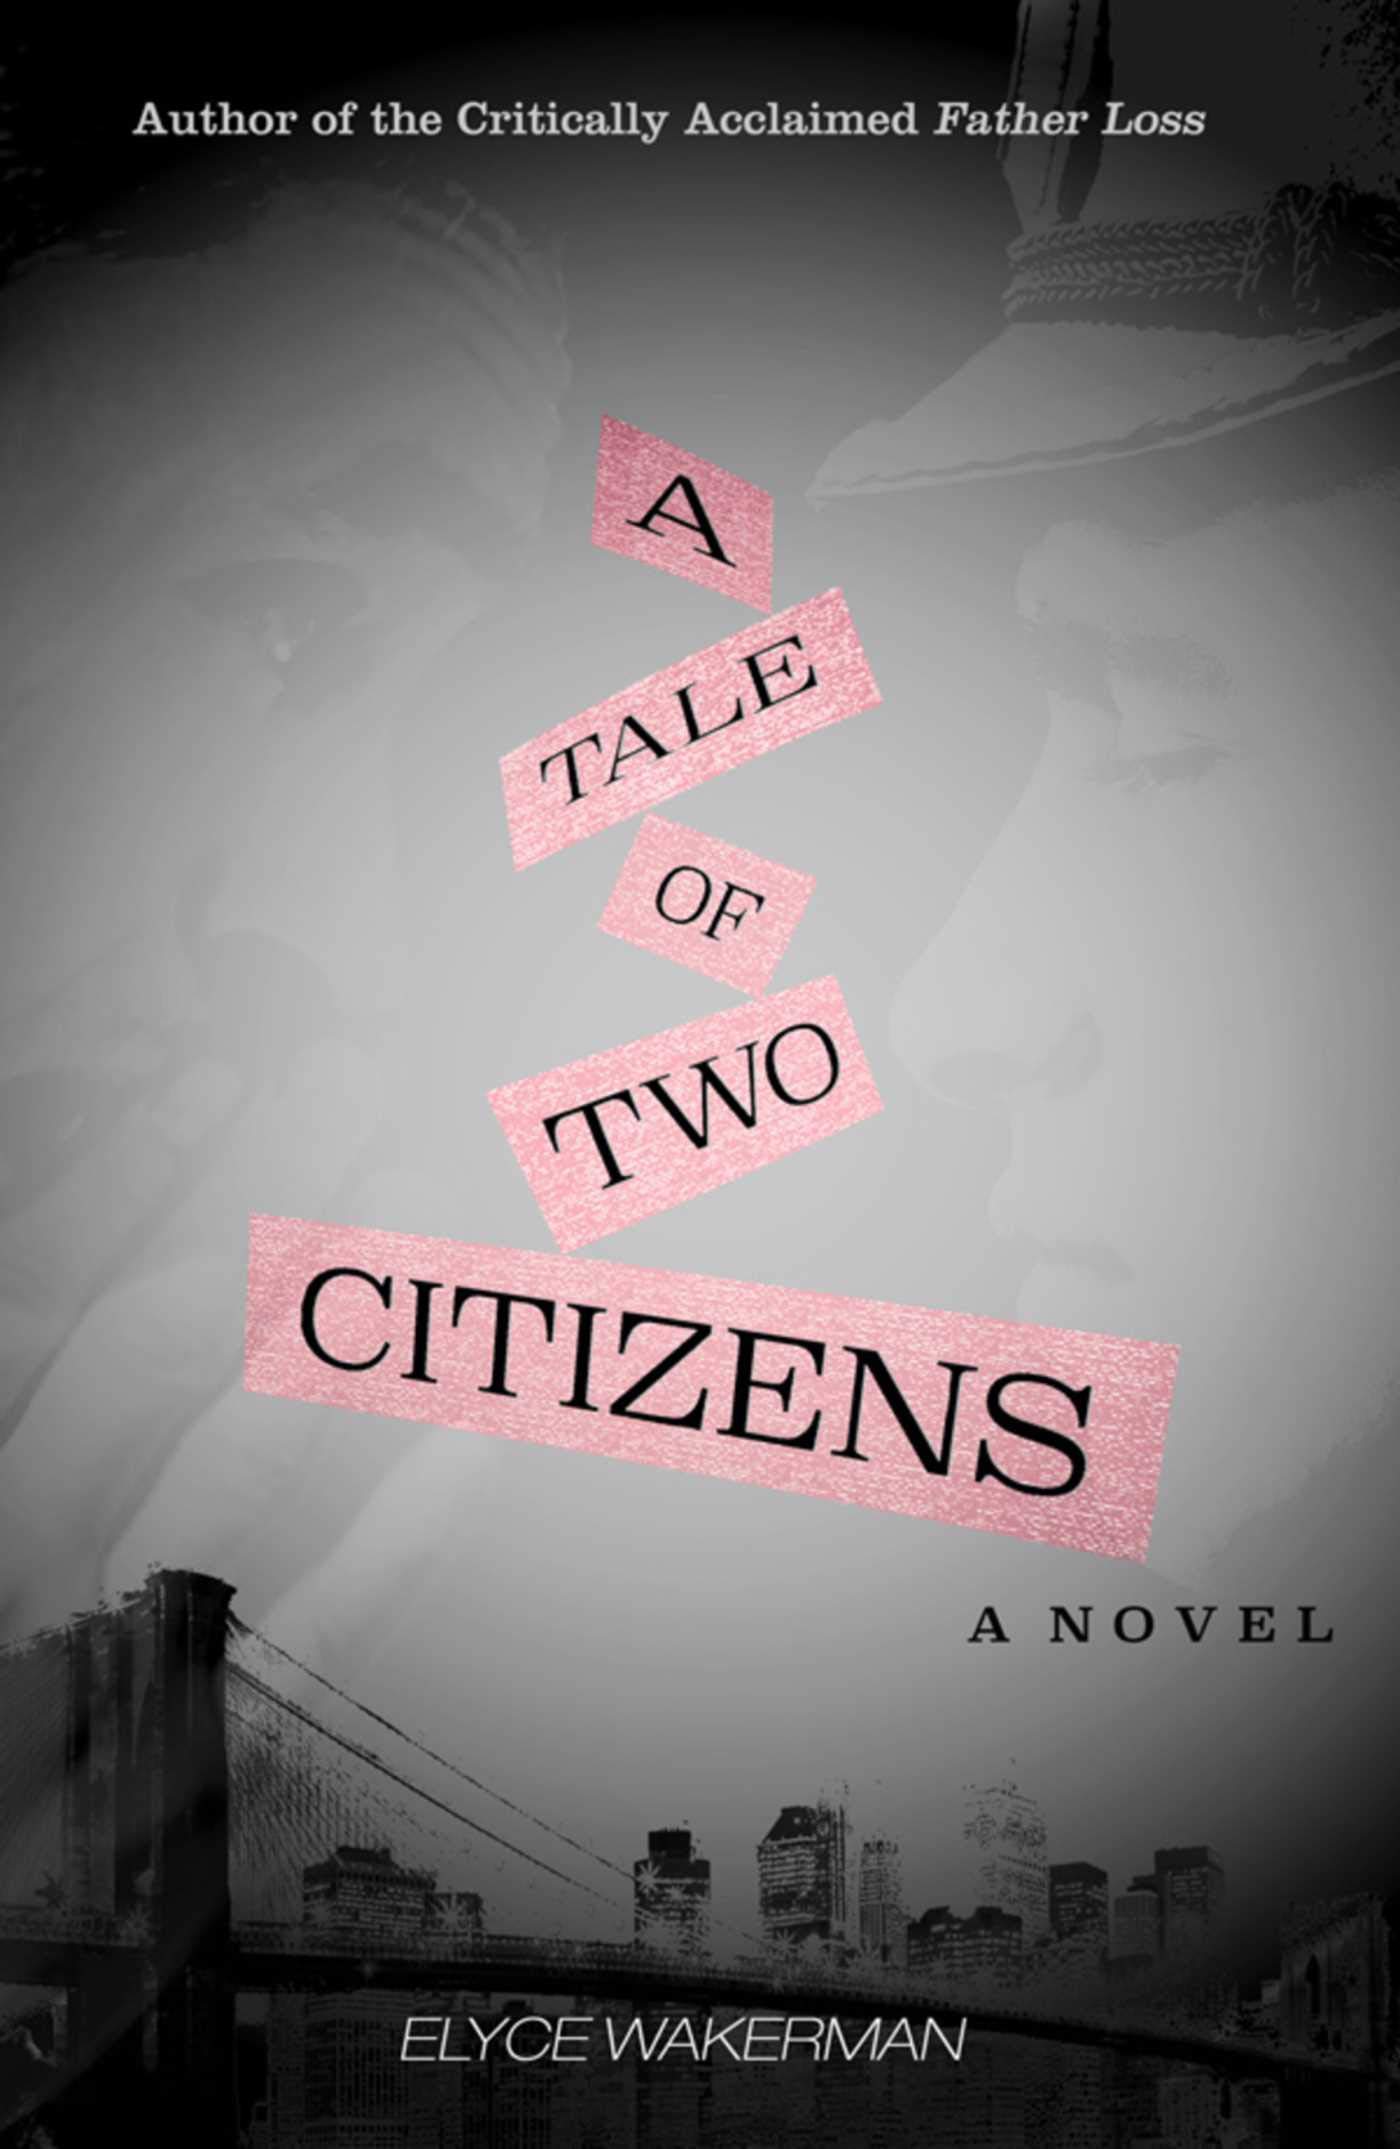 A Tale of Two Citizens: A Novel